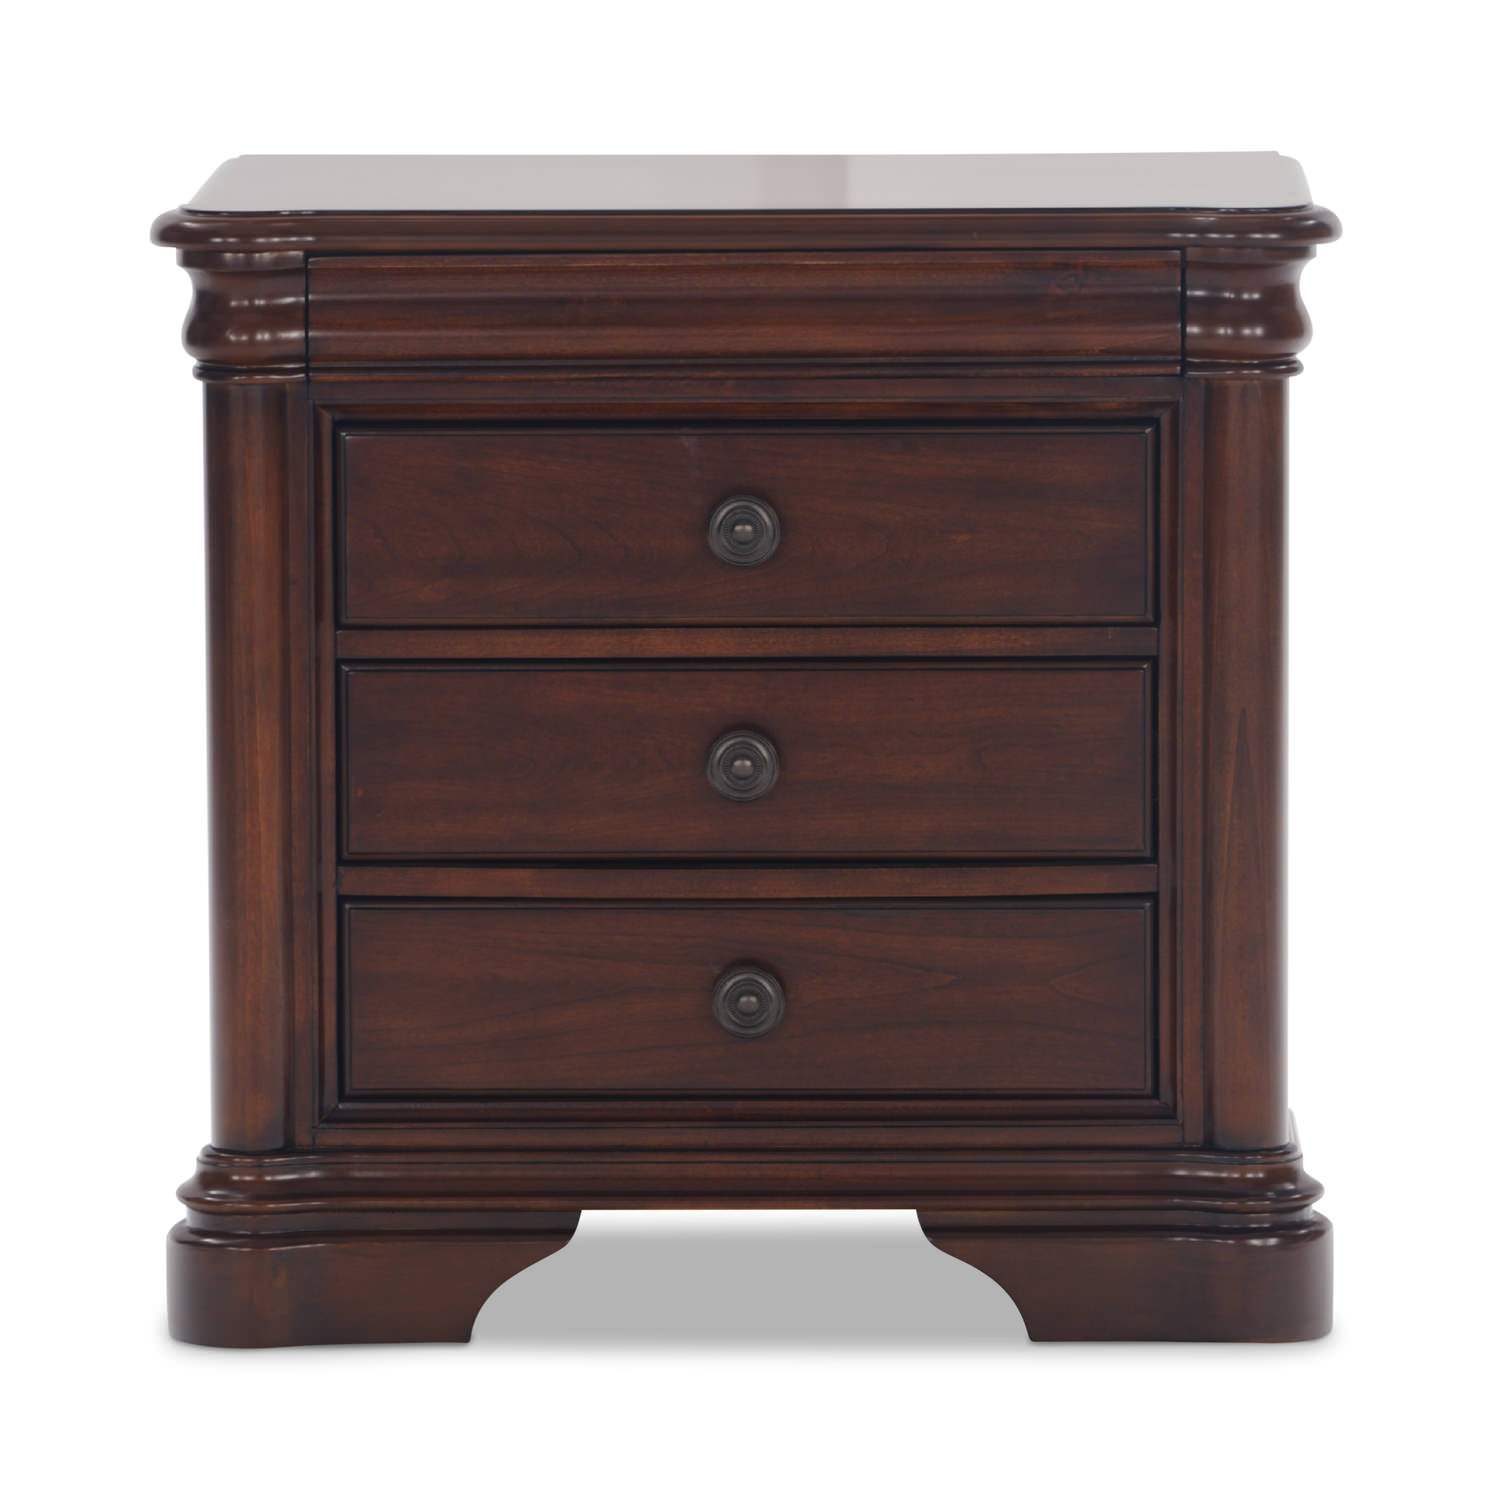 Waterford Harbour Nightstand